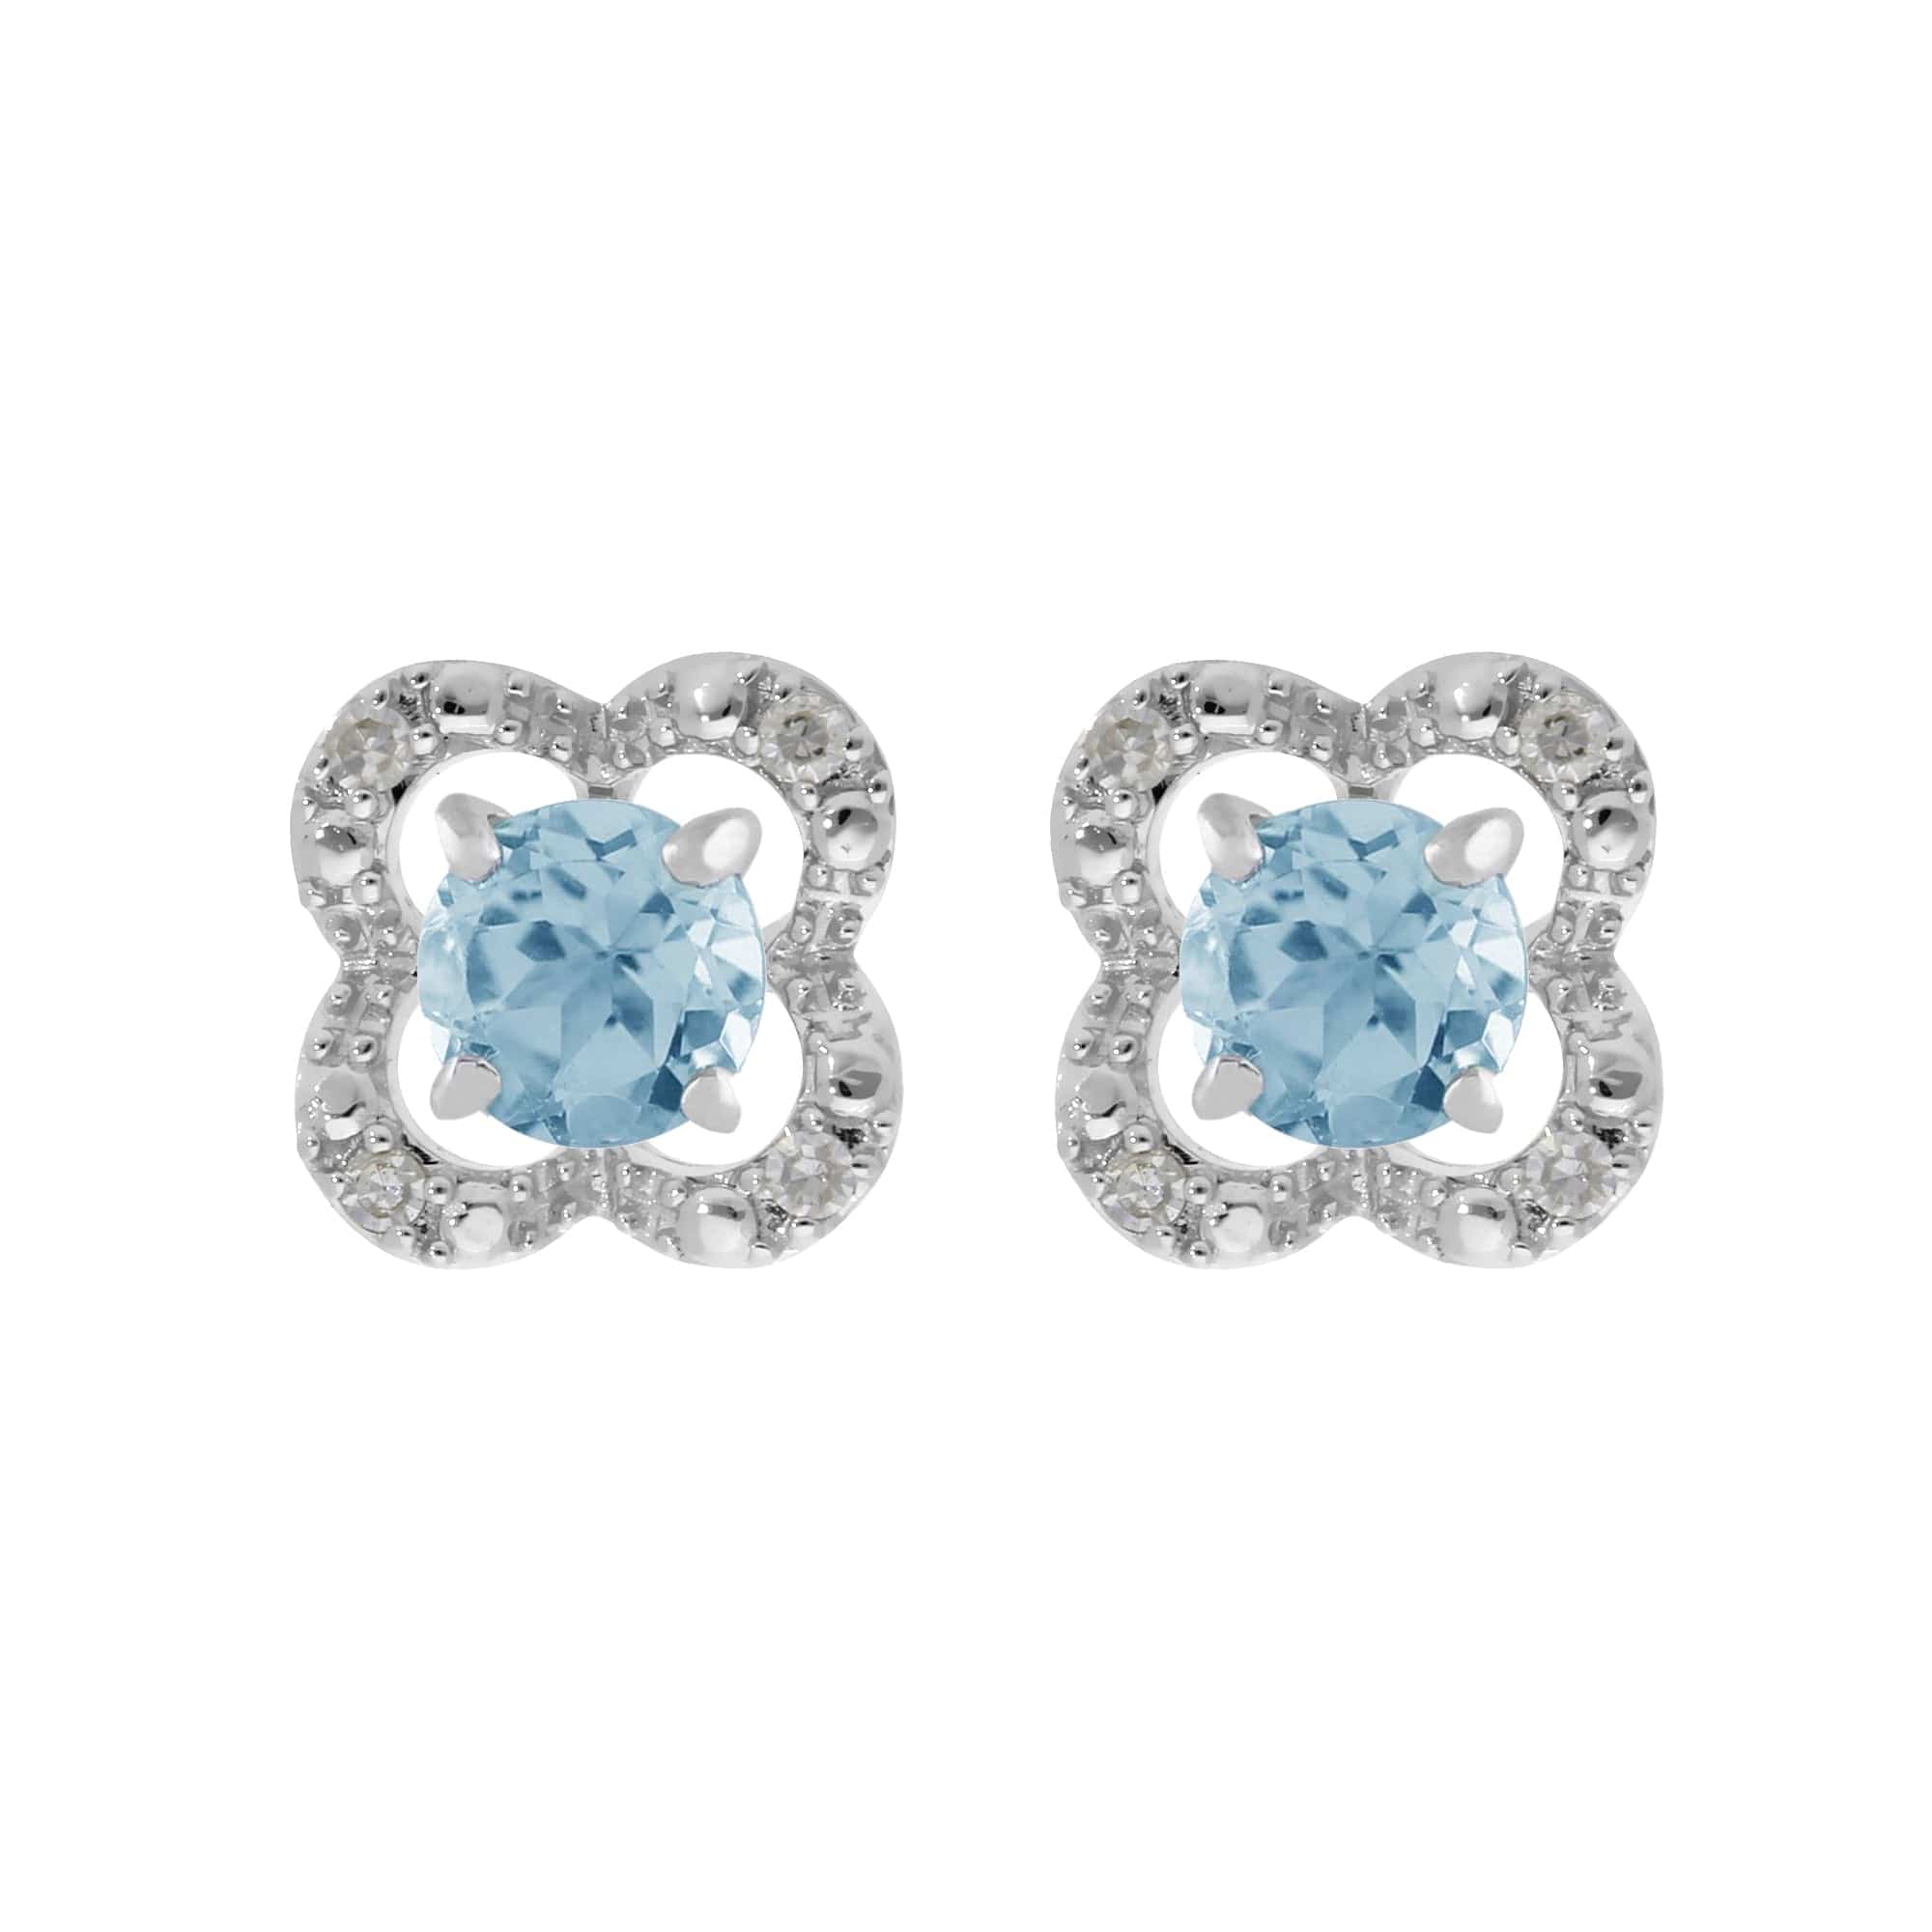 11623-162E0244019 Classic Round Blue Topaz Stud Earrings with Detachable Diamond Flower Ear Jacket in 9ct White Gold 1